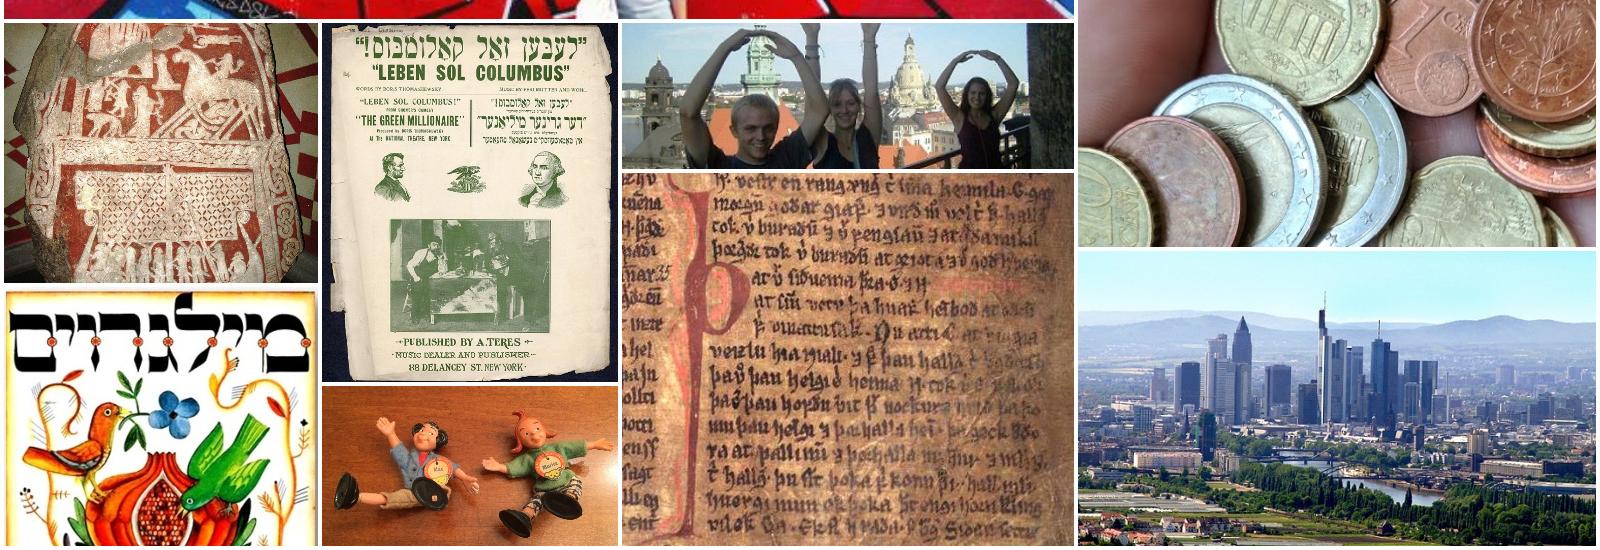 Collage of activities and artifacts